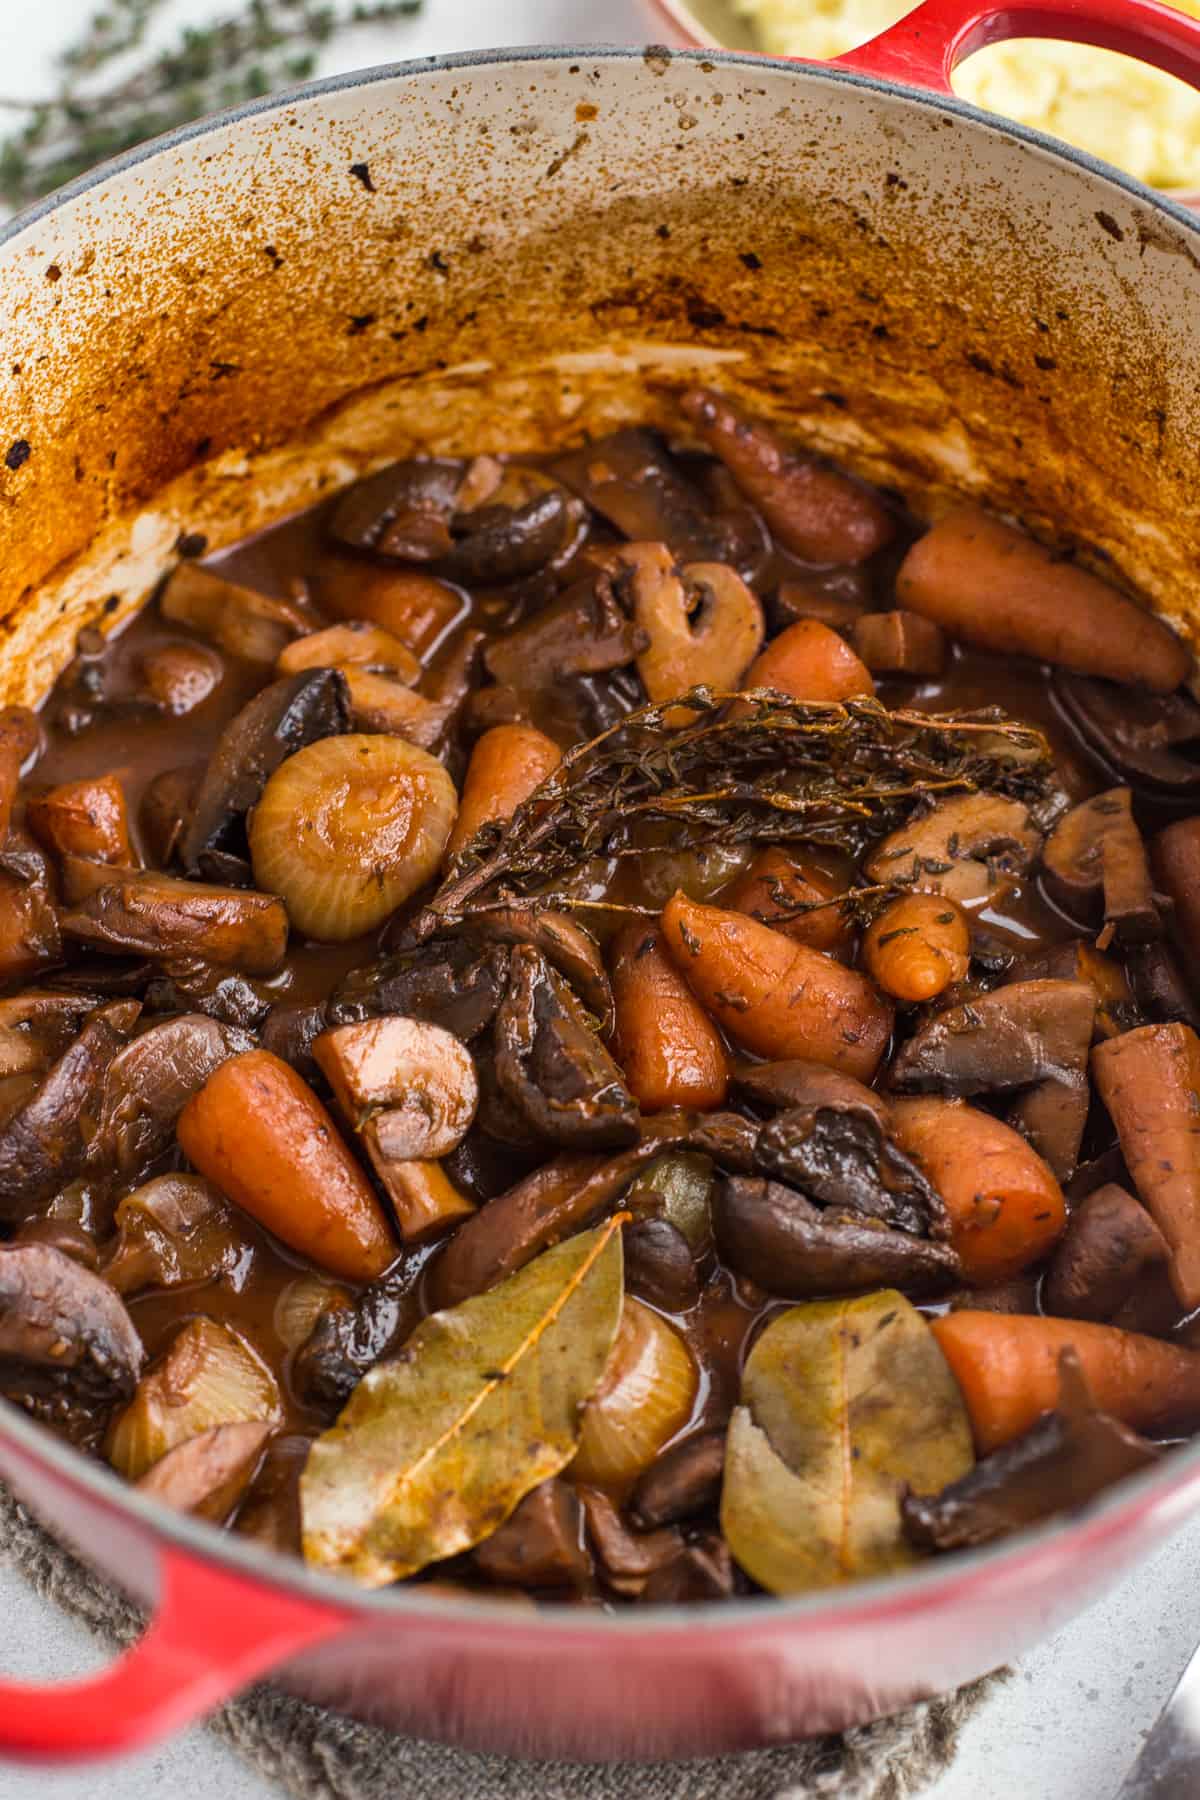 Vegetarian bourguignon in a casserole dish with carrots and onions.